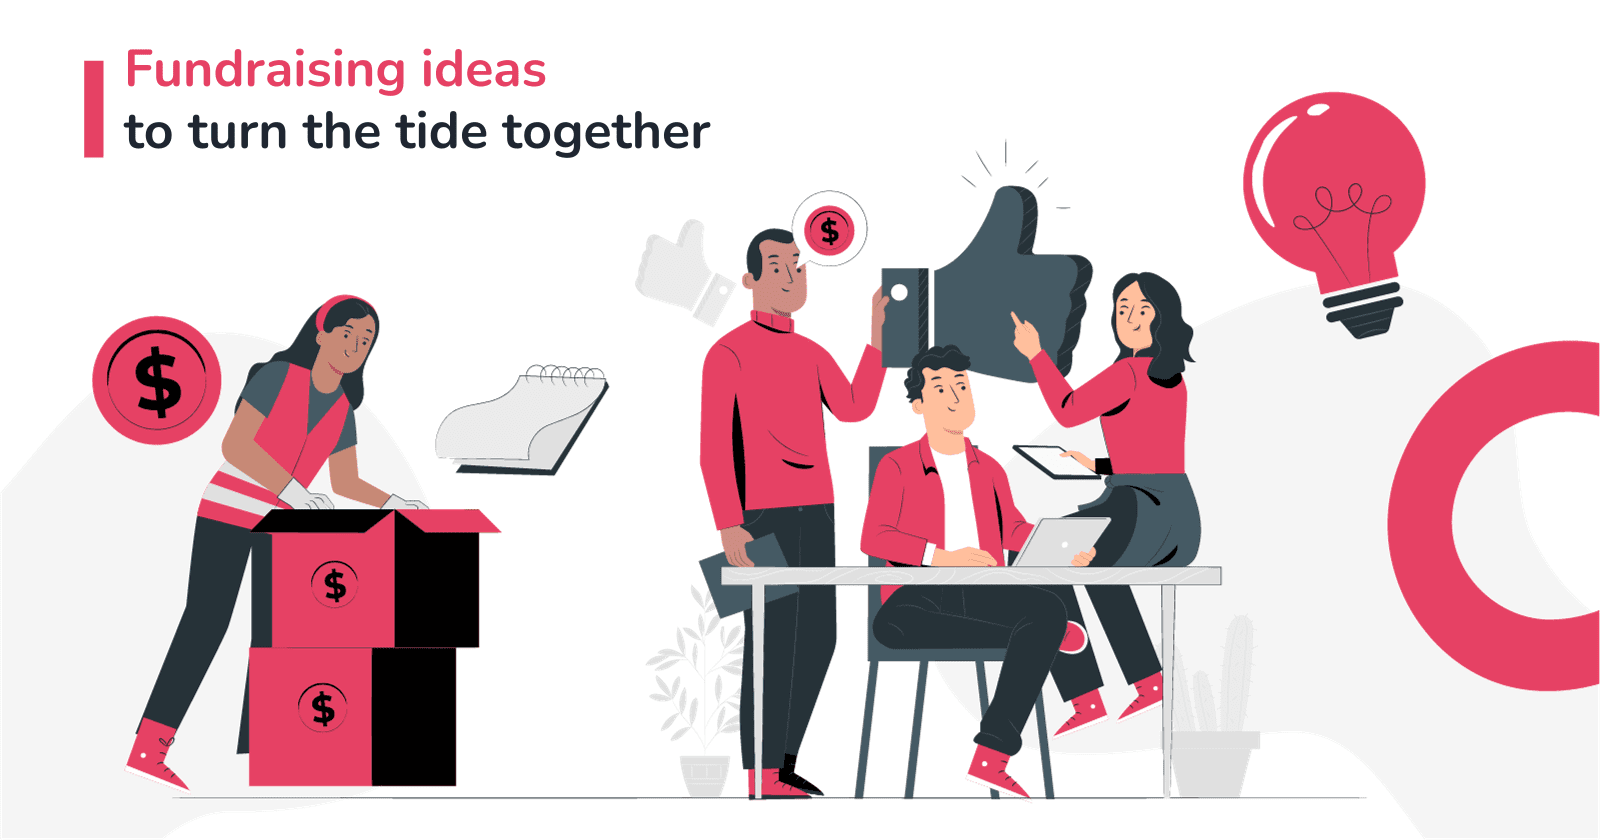 Fundraising ideas to turn the tide together